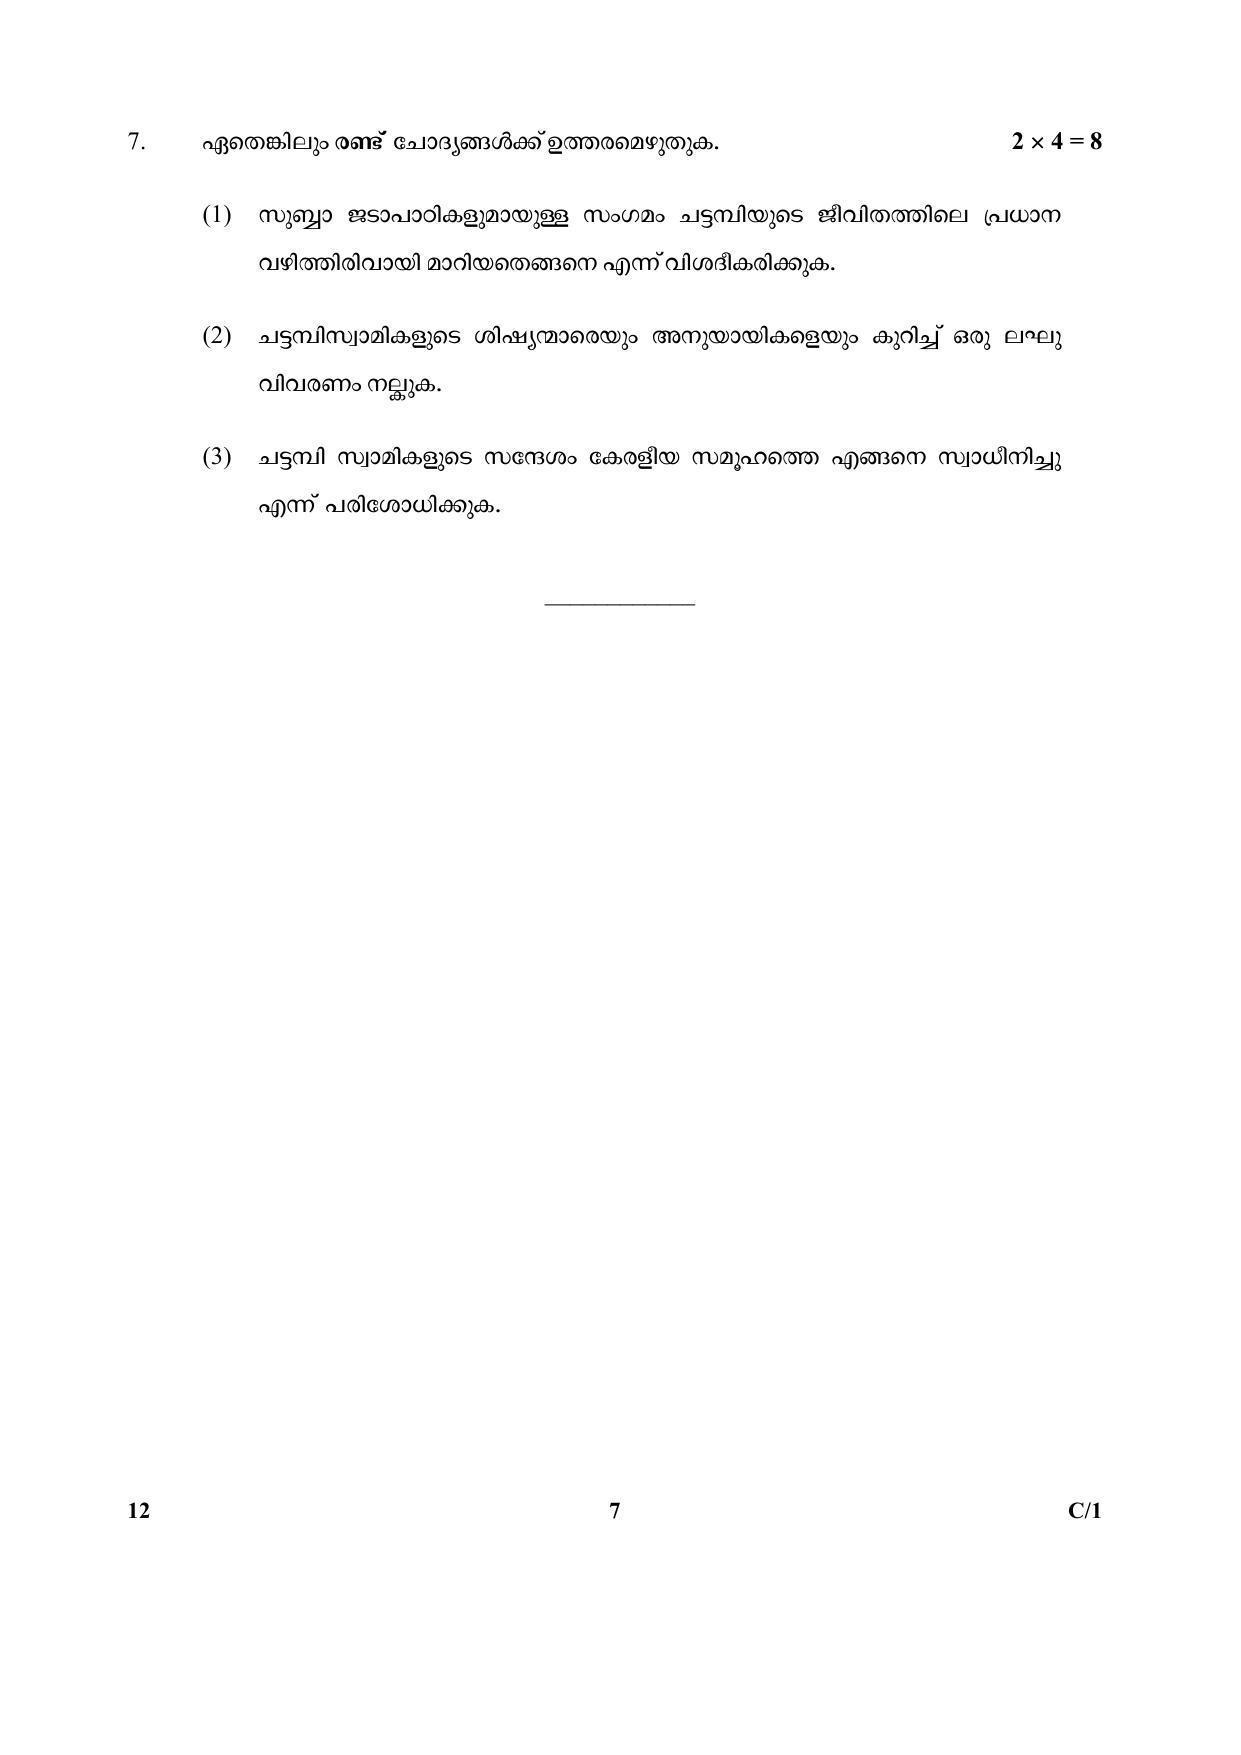 CBSE Class 10 12 (Malayalam) 2018 Compartment Question Paper - Page 7